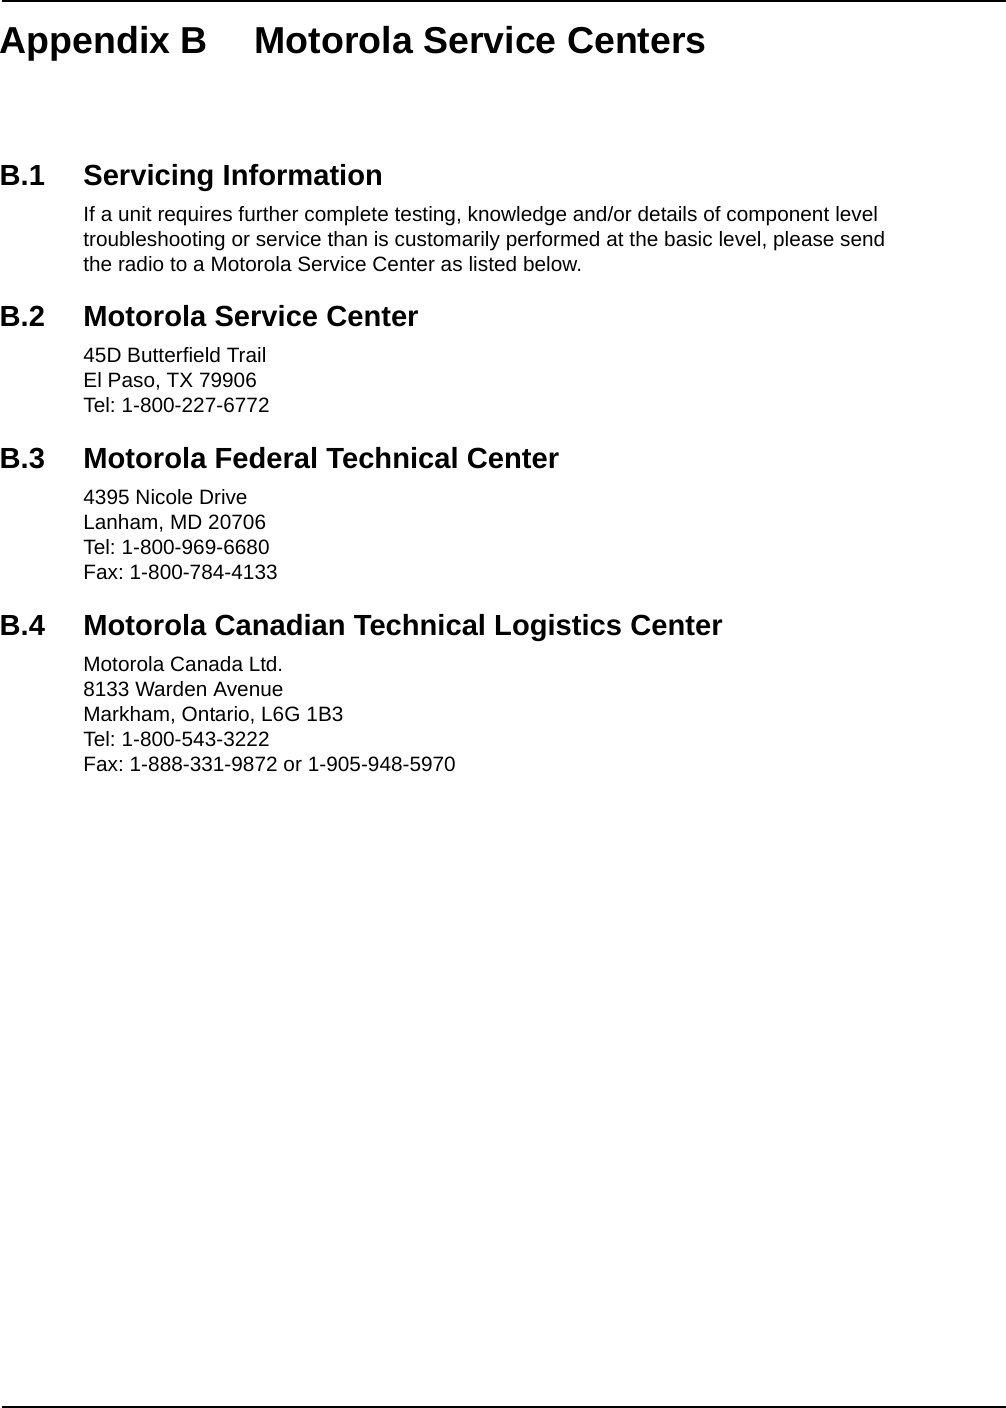 Appendix B Motorola Service CentersB.1 Servicing InformationIf a unit requires further complete testing, knowledge and/or details of component level troubleshooting or service than is customarily performed at the basic level, please send the radio to a Motorola Service Center as listed below.B.2 Motorola Service Center45D Butterfield TrailEl Paso, TX 79906Tel: 1-800-227-6772B.3 Motorola Federal Technical Center4395 Nicole DriveLanham, MD 20706Tel: 1-800-969-6680Fax: 1-800-784-4133B.4 Motorola Canadian Technical Logistics CenterMotorola Canada Ltd.8133 Warden AvenueMarkham, Ontario, L6G 1B3Tel: 1-800-543-3222Fax: 1-888-331-9872 or 1-905-948-5970